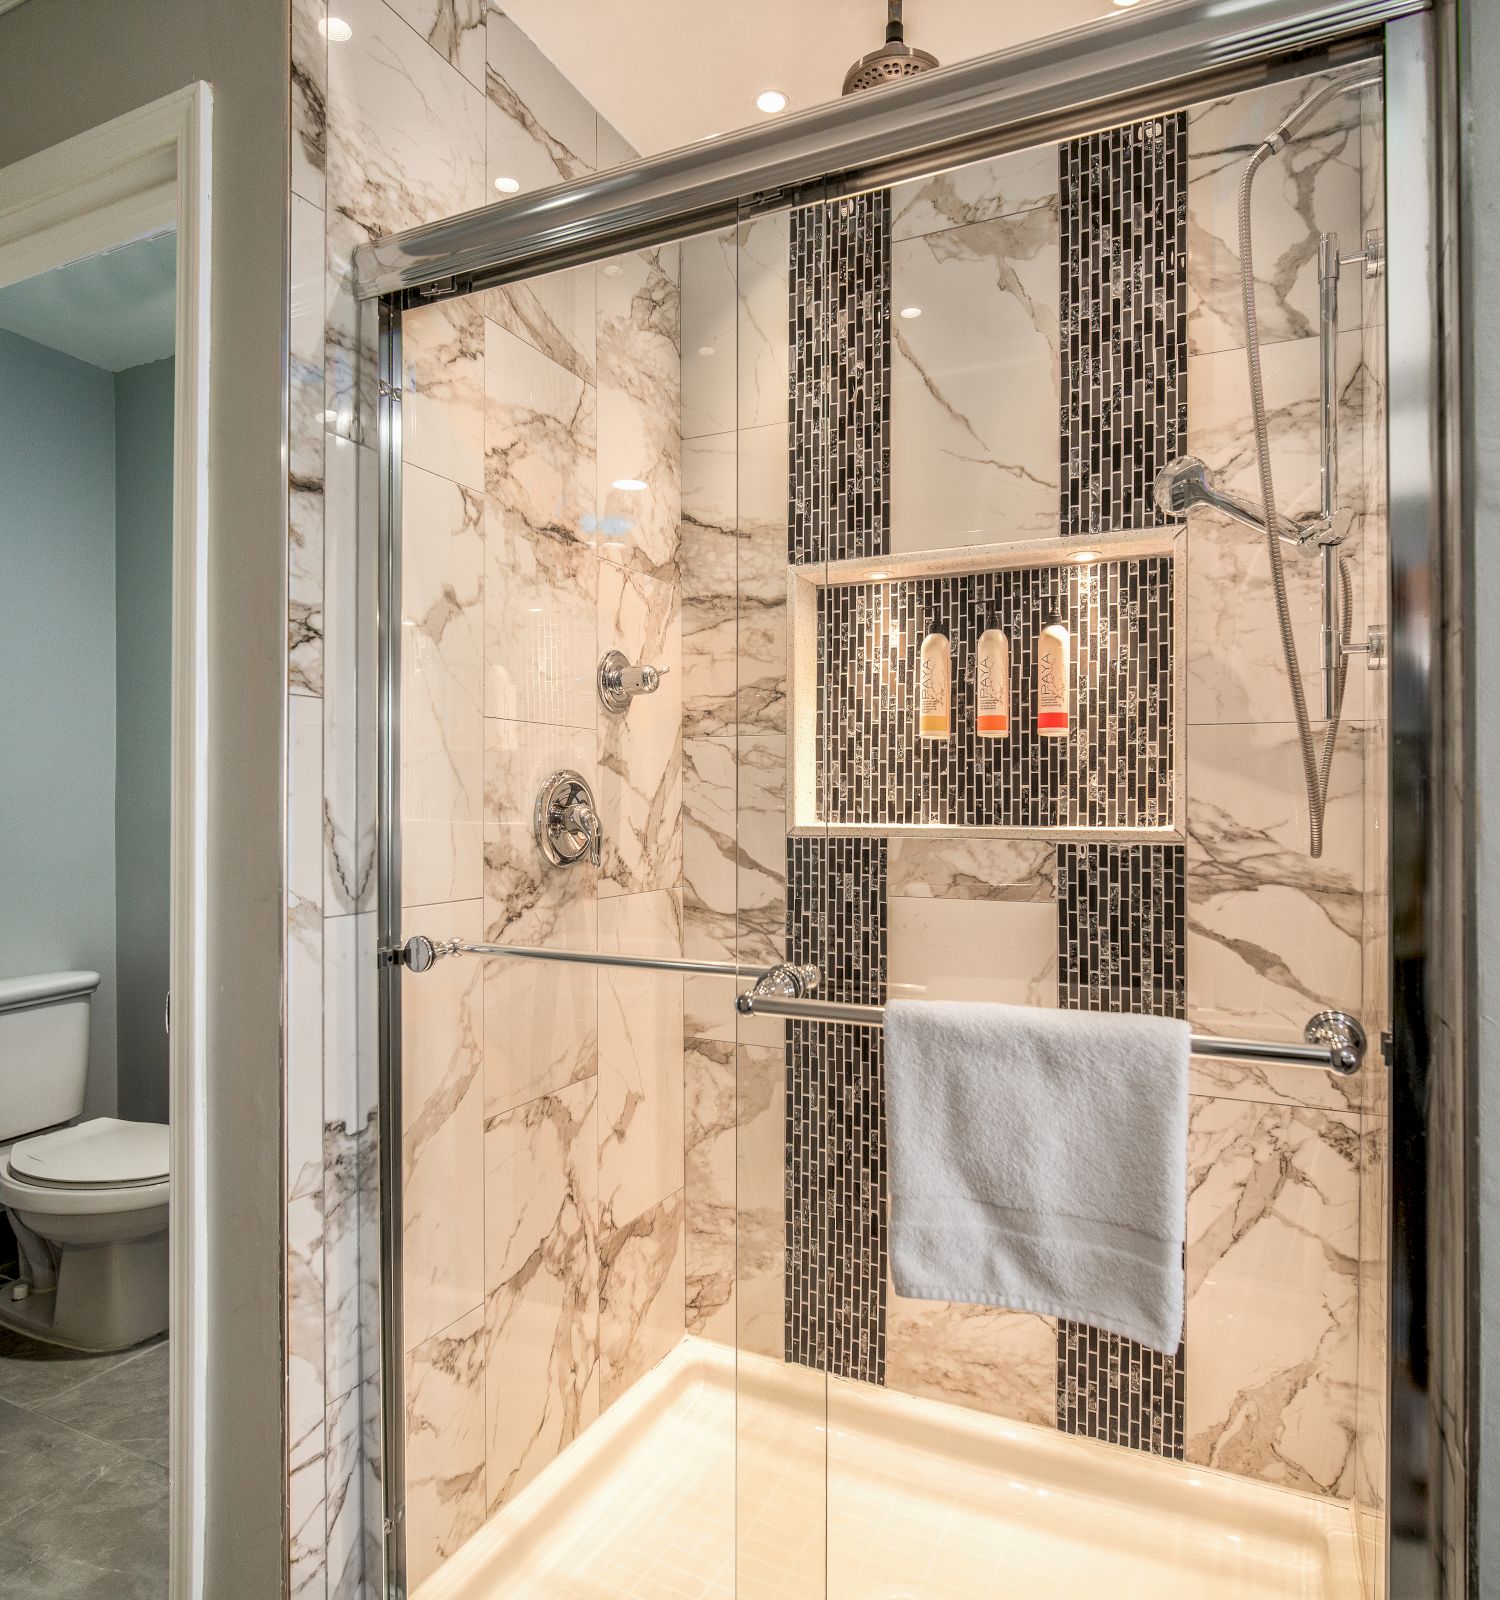 The image shows a modern bathroom with a glass-enclosed shower featuring marble and mosaic tiles, a towel hanging on the door, and a view of the toilet.